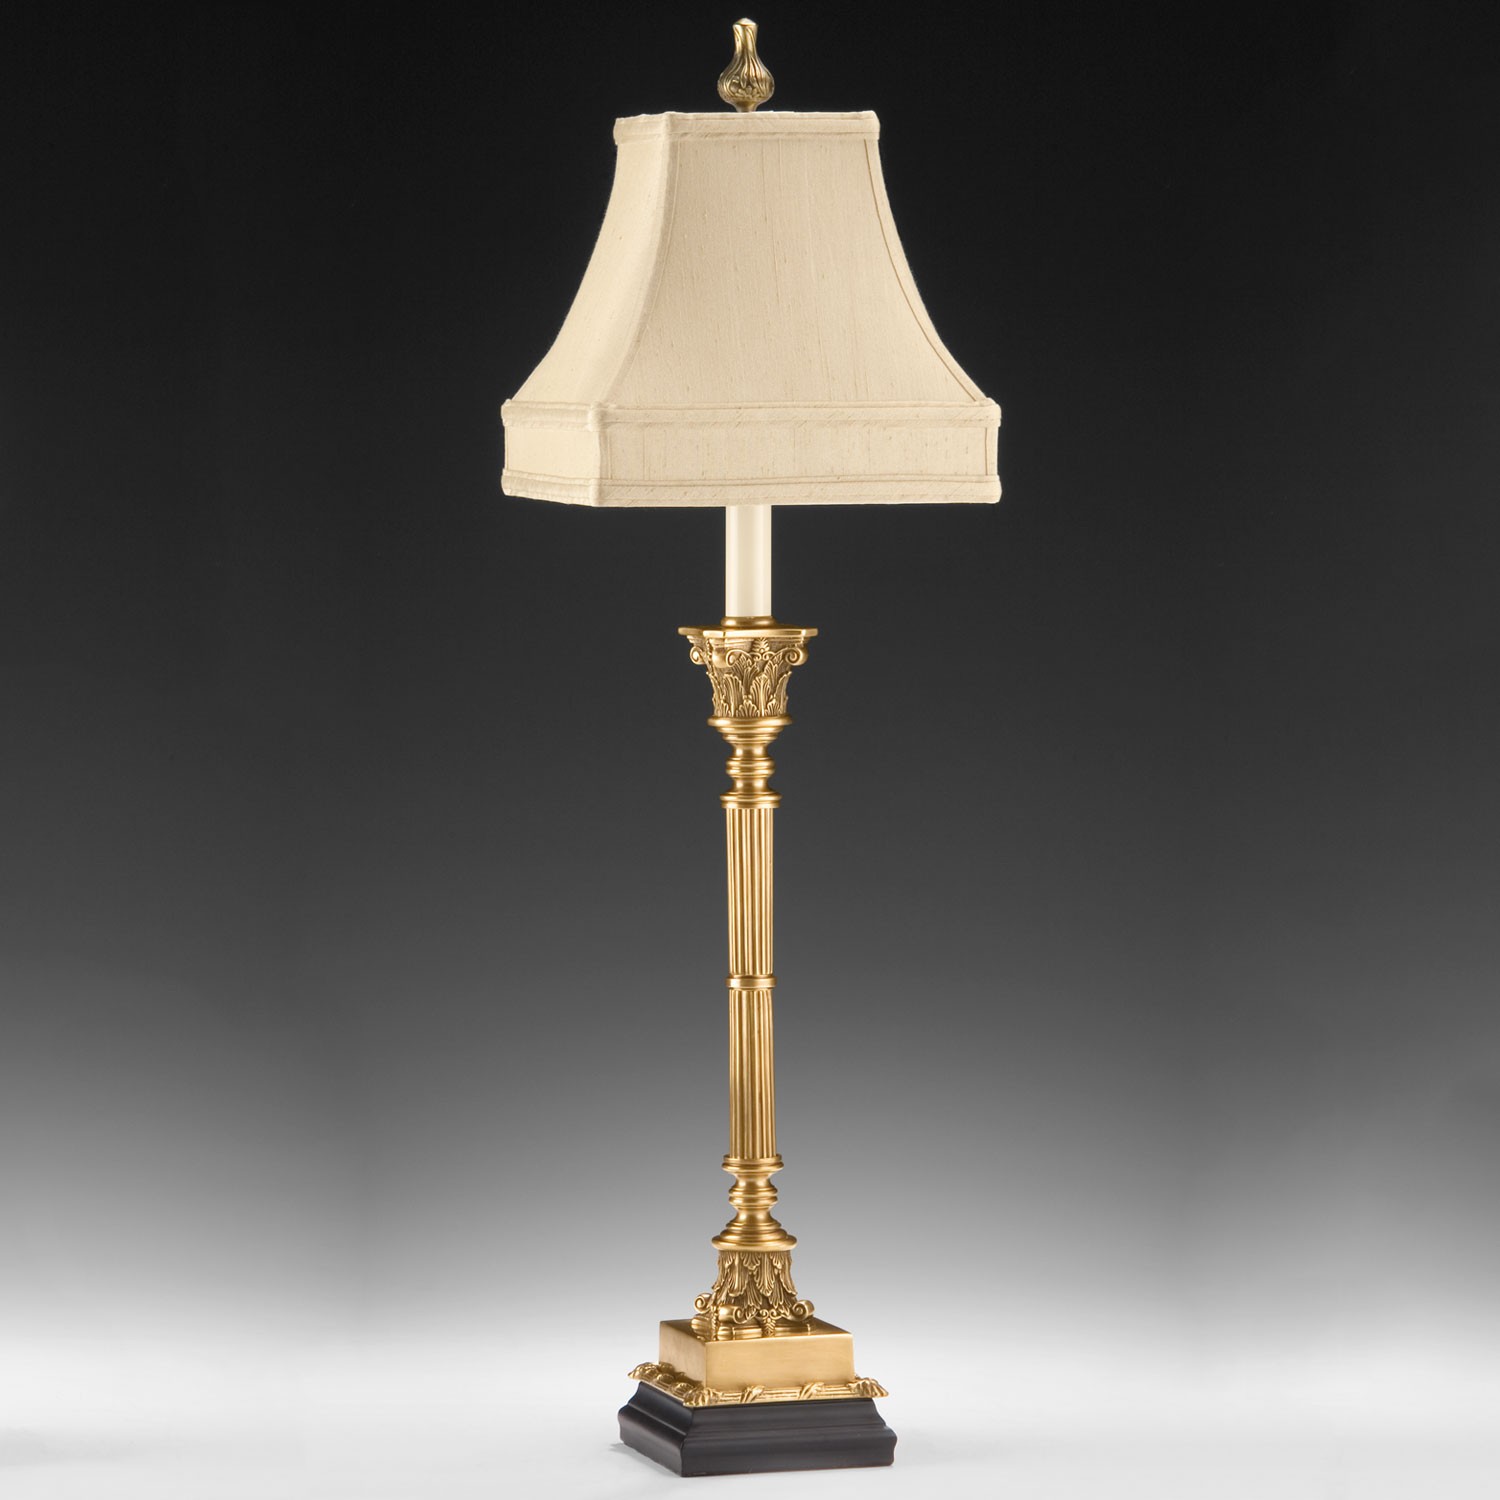 Solid brass corinthian table lamp